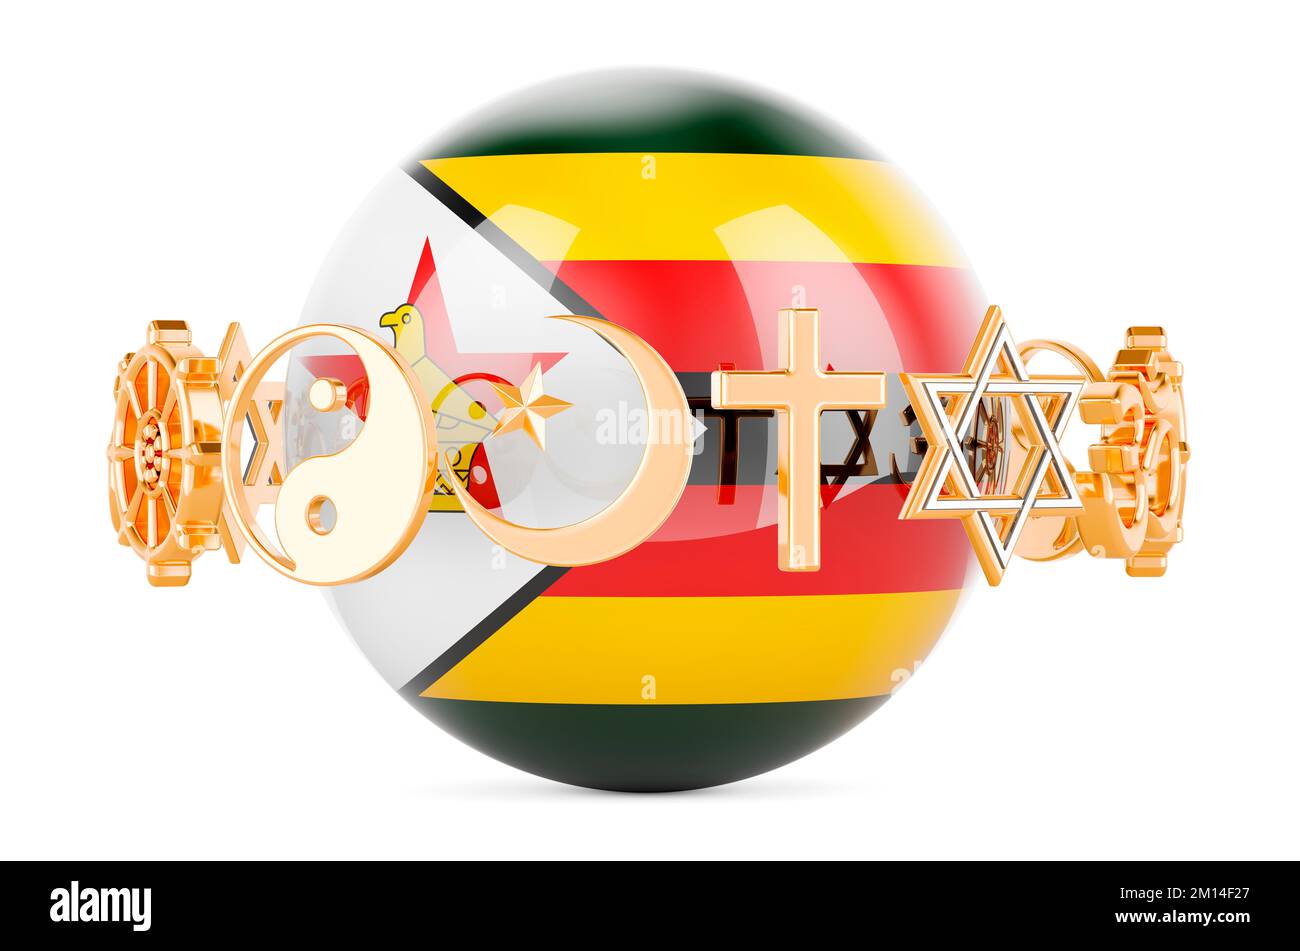 Zimbabwean flag painted on sphere with religions symbols around, 3D rendering isolated on white background Stock Photo